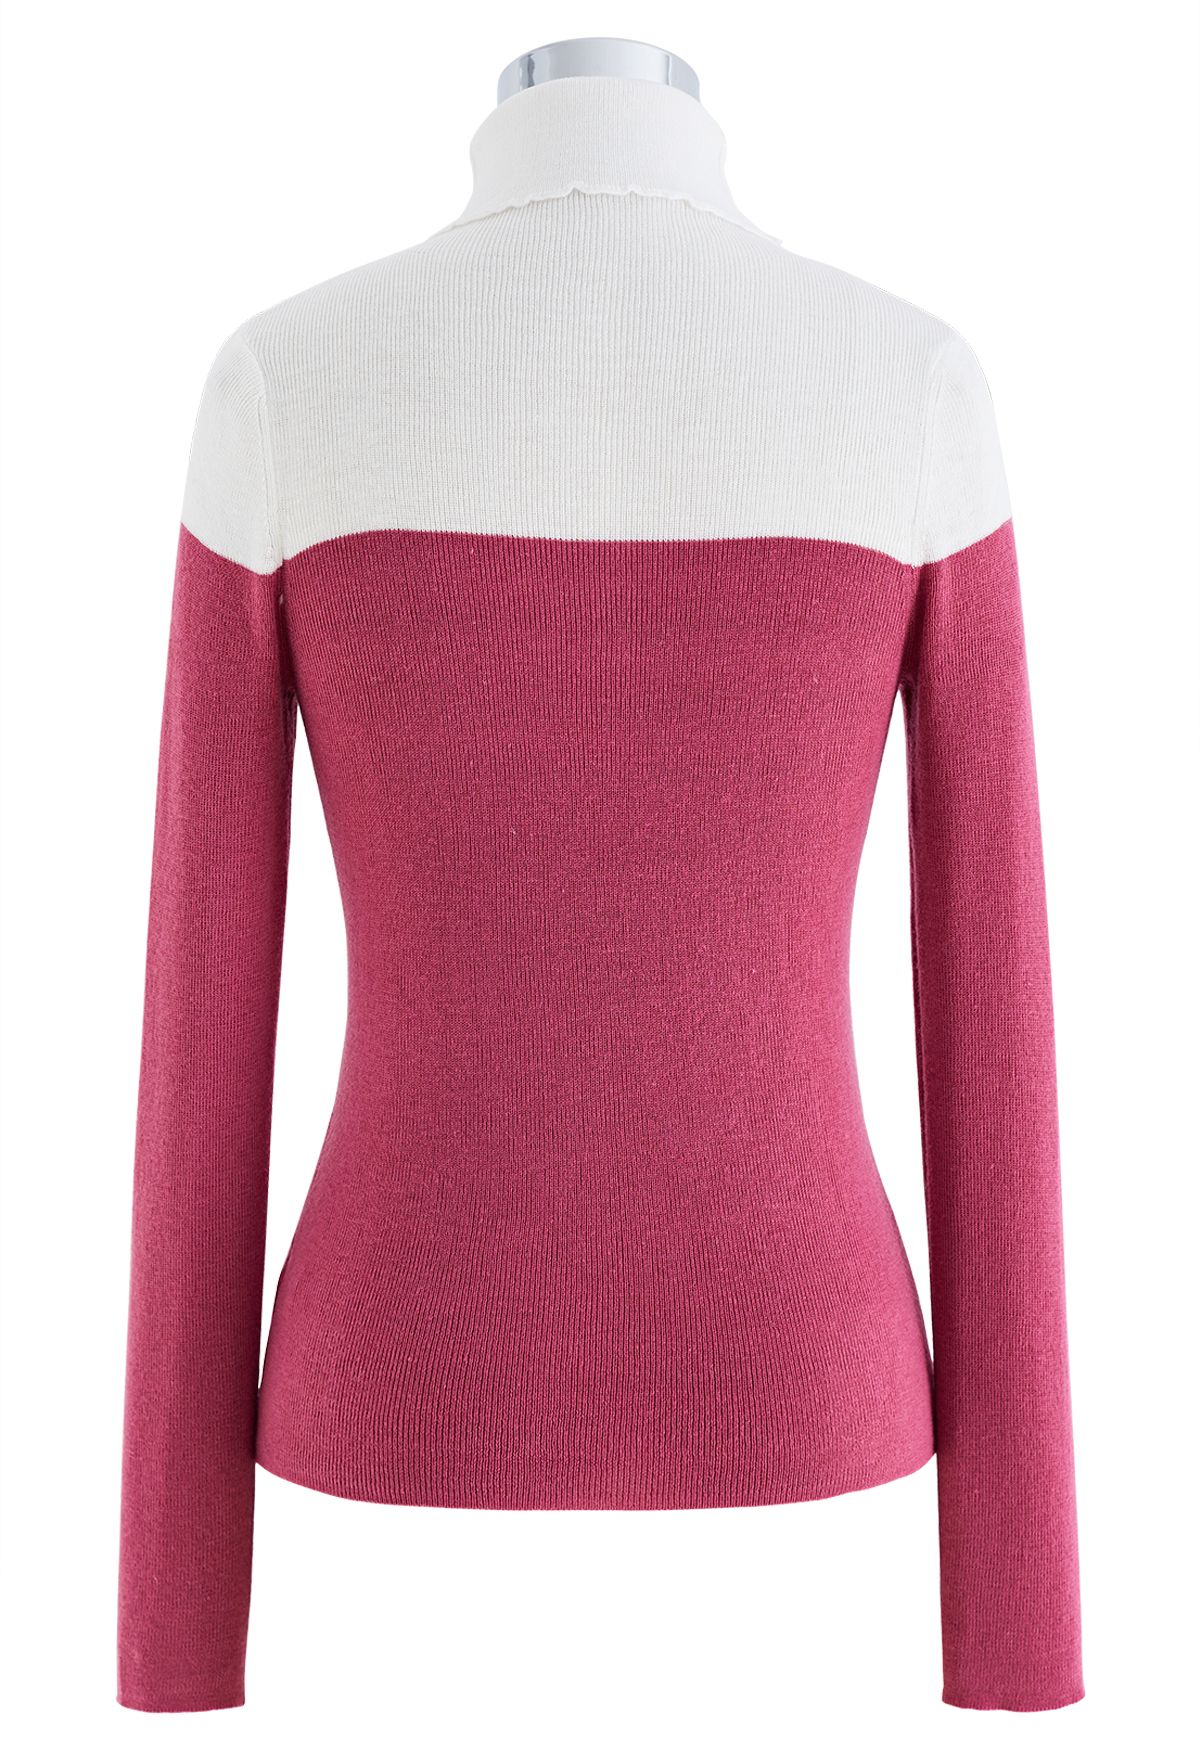 Turtleneck Two-Tone Fitted Knit Top in Berry